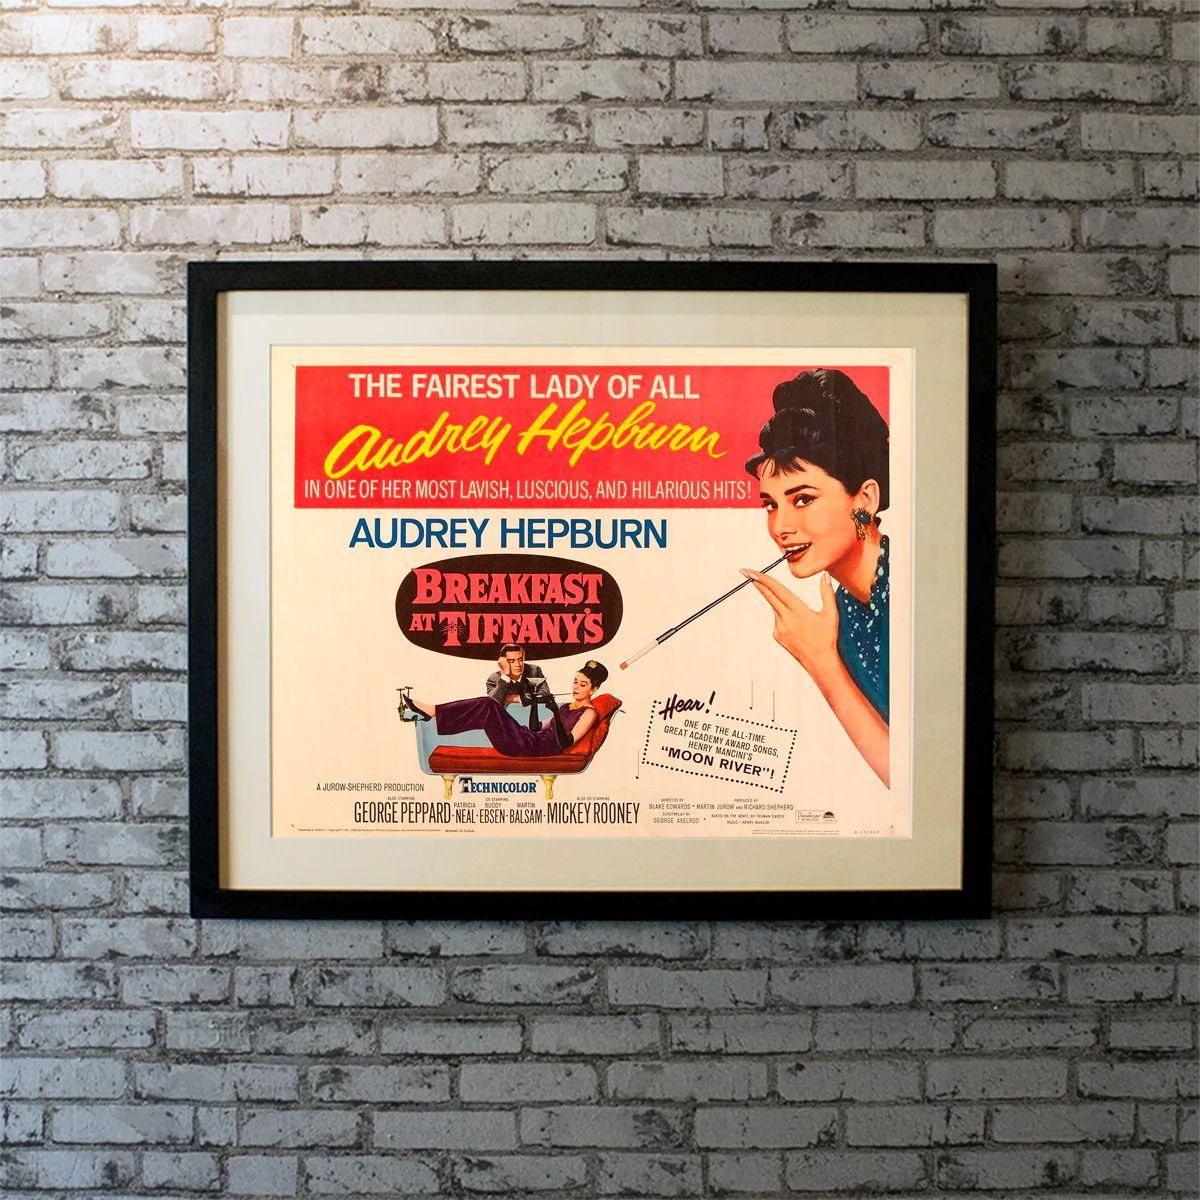 Breakfast At Tiffany's, Unframed Poster, 1965R

Half Sheets (22 X 28 Inches). A young New York socialite becomes interested in a young man who has moved into her apartment building, but her past threatens to get in the way.

Additional